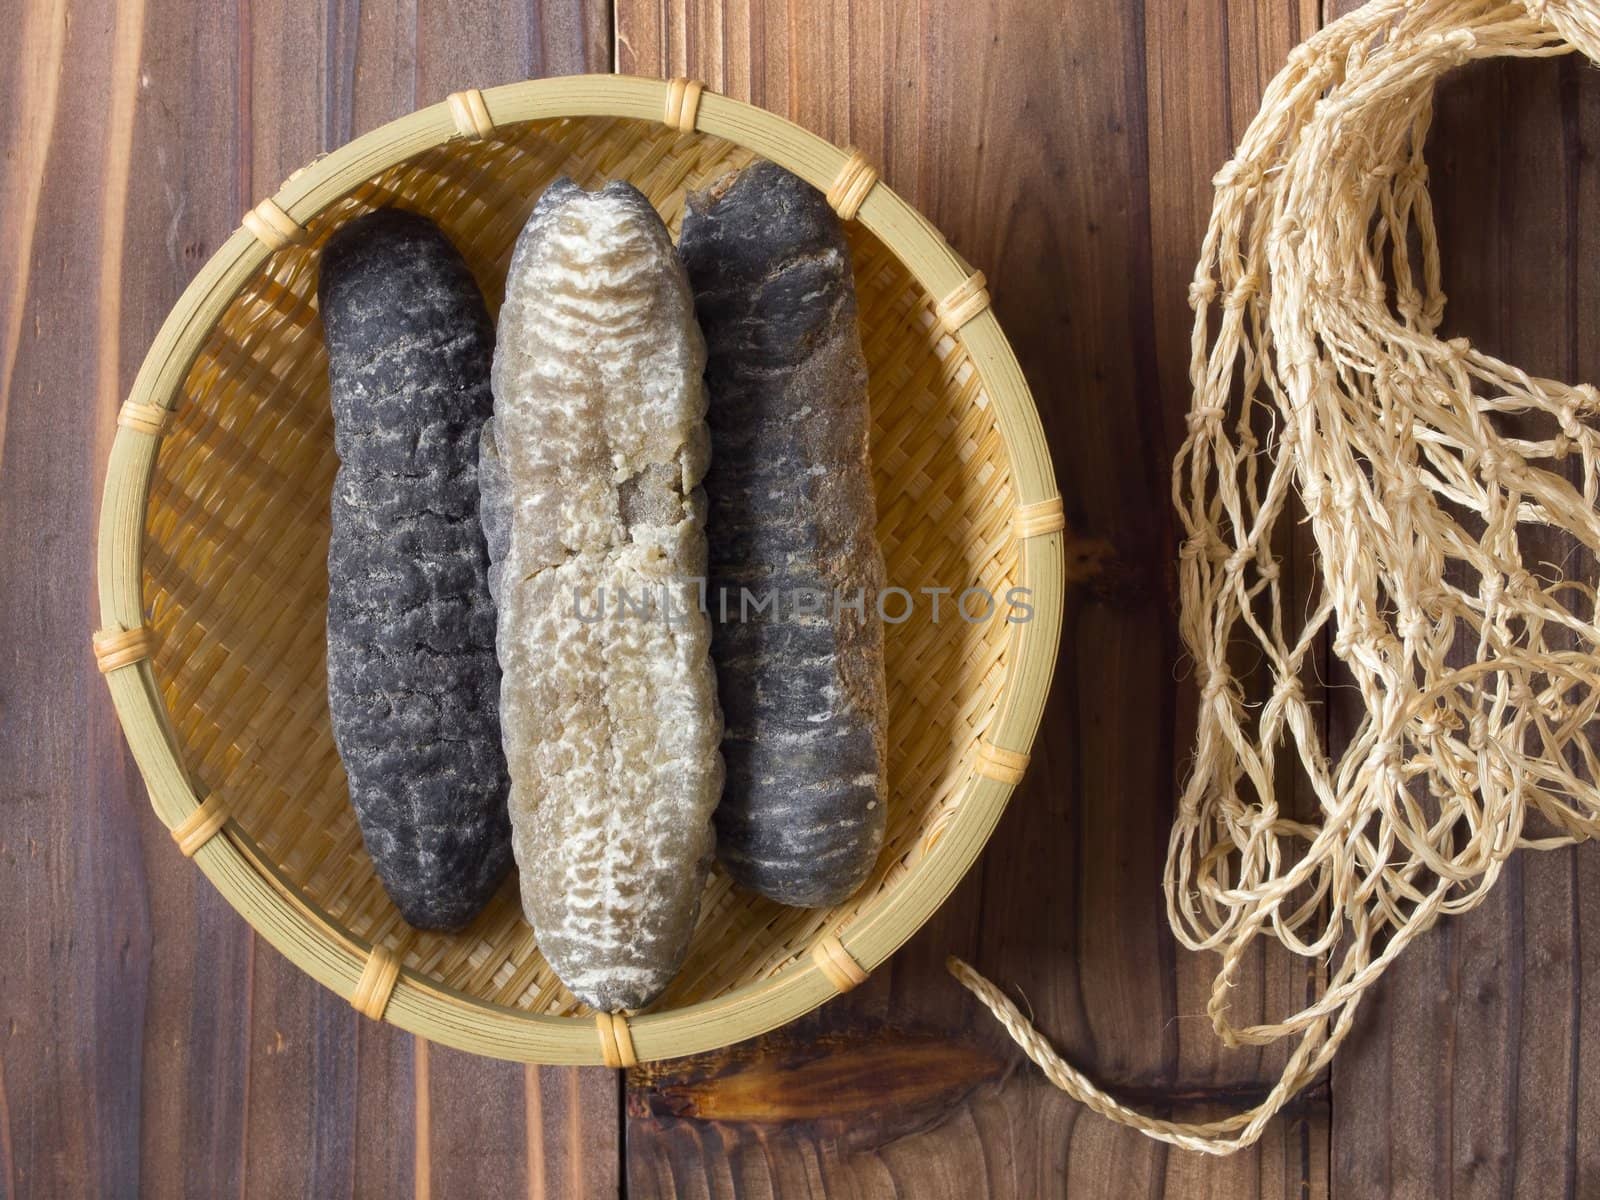 dried sea cucumber by zkruger